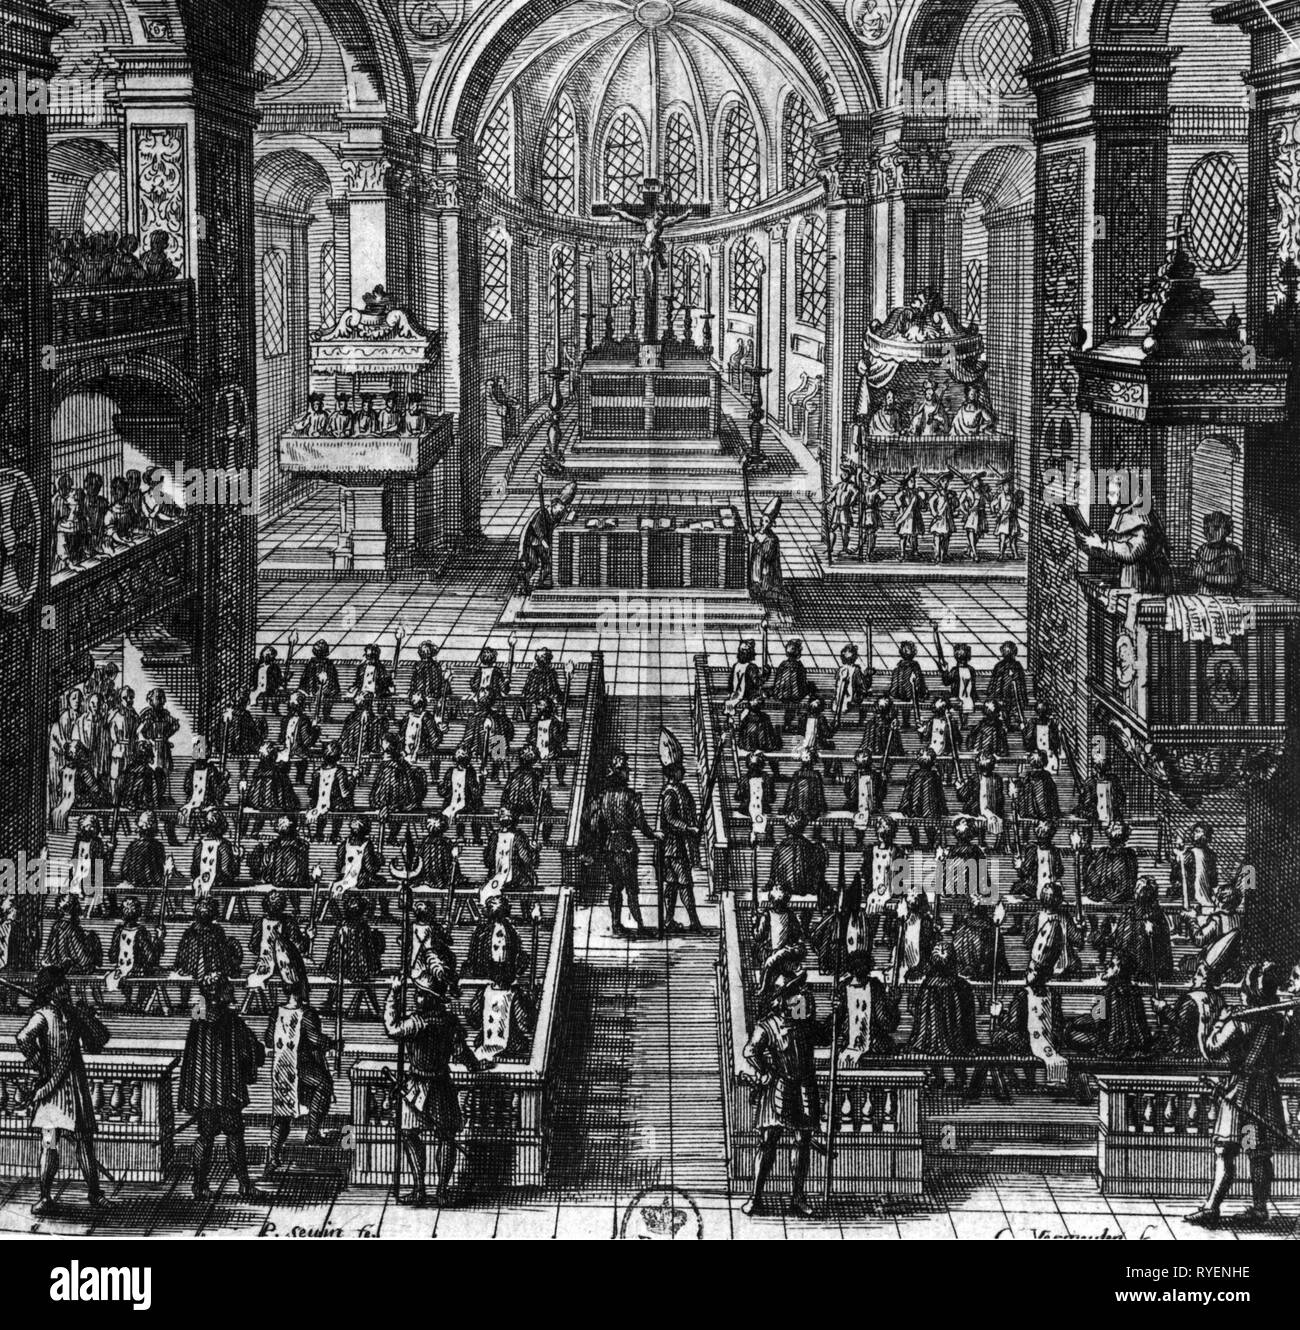 justice, inquisition, auto-da-fe, convicted heretics in the church, Lima, by C.Vermeulen, copper engraving, 17th century, 17th century, graphic, graphics, jurisdiction, court of justice, courts of justice, South America, Peru, religion, religions, Christianity, Catholicism, heresies, heresy, church, churches, pulpit, preach, preaching, crucifix, crucifixes, convict, holy Officium, candle, candles, ecclesiastic justice, clergyman, clergymen, auto-da-fe, auto da fe, heretic, heretics, Lima, historic, historical, people, Additional-Rights-Clearance-Info-Not-Available Stock Photo